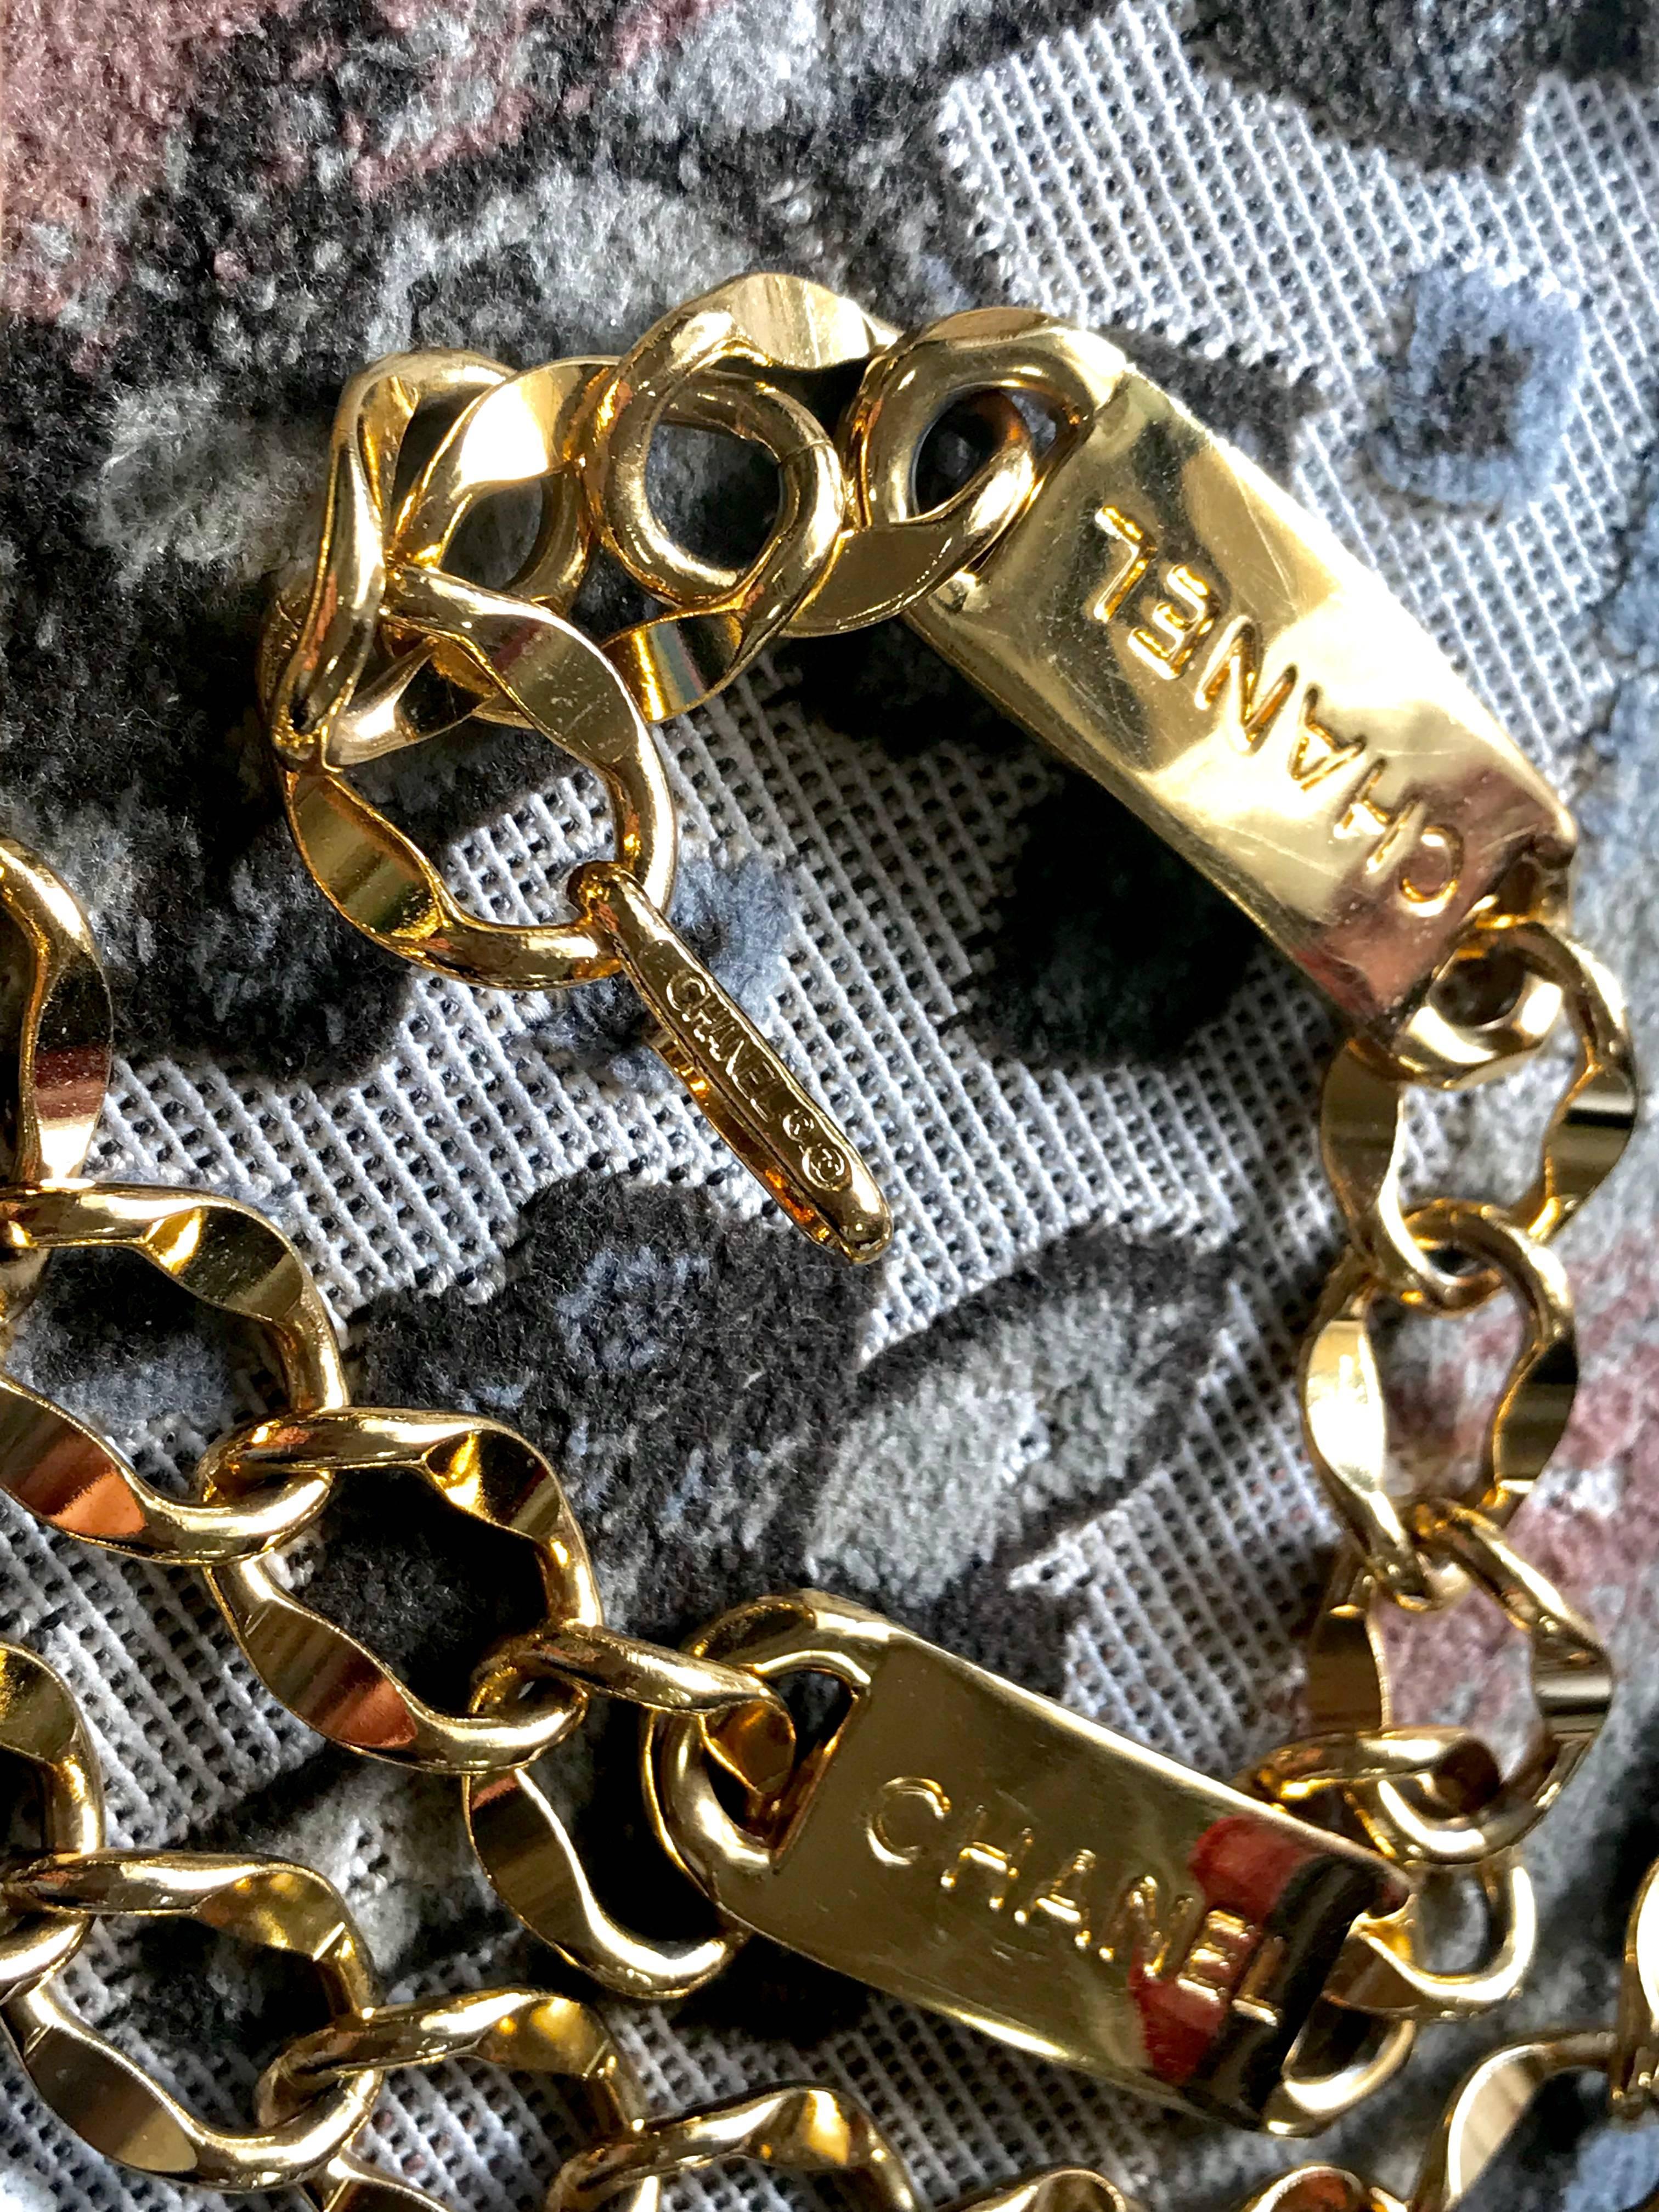 MINT. 80's Vintage CHANEL golden thick chain belt with logo engraved bar motifs. 1